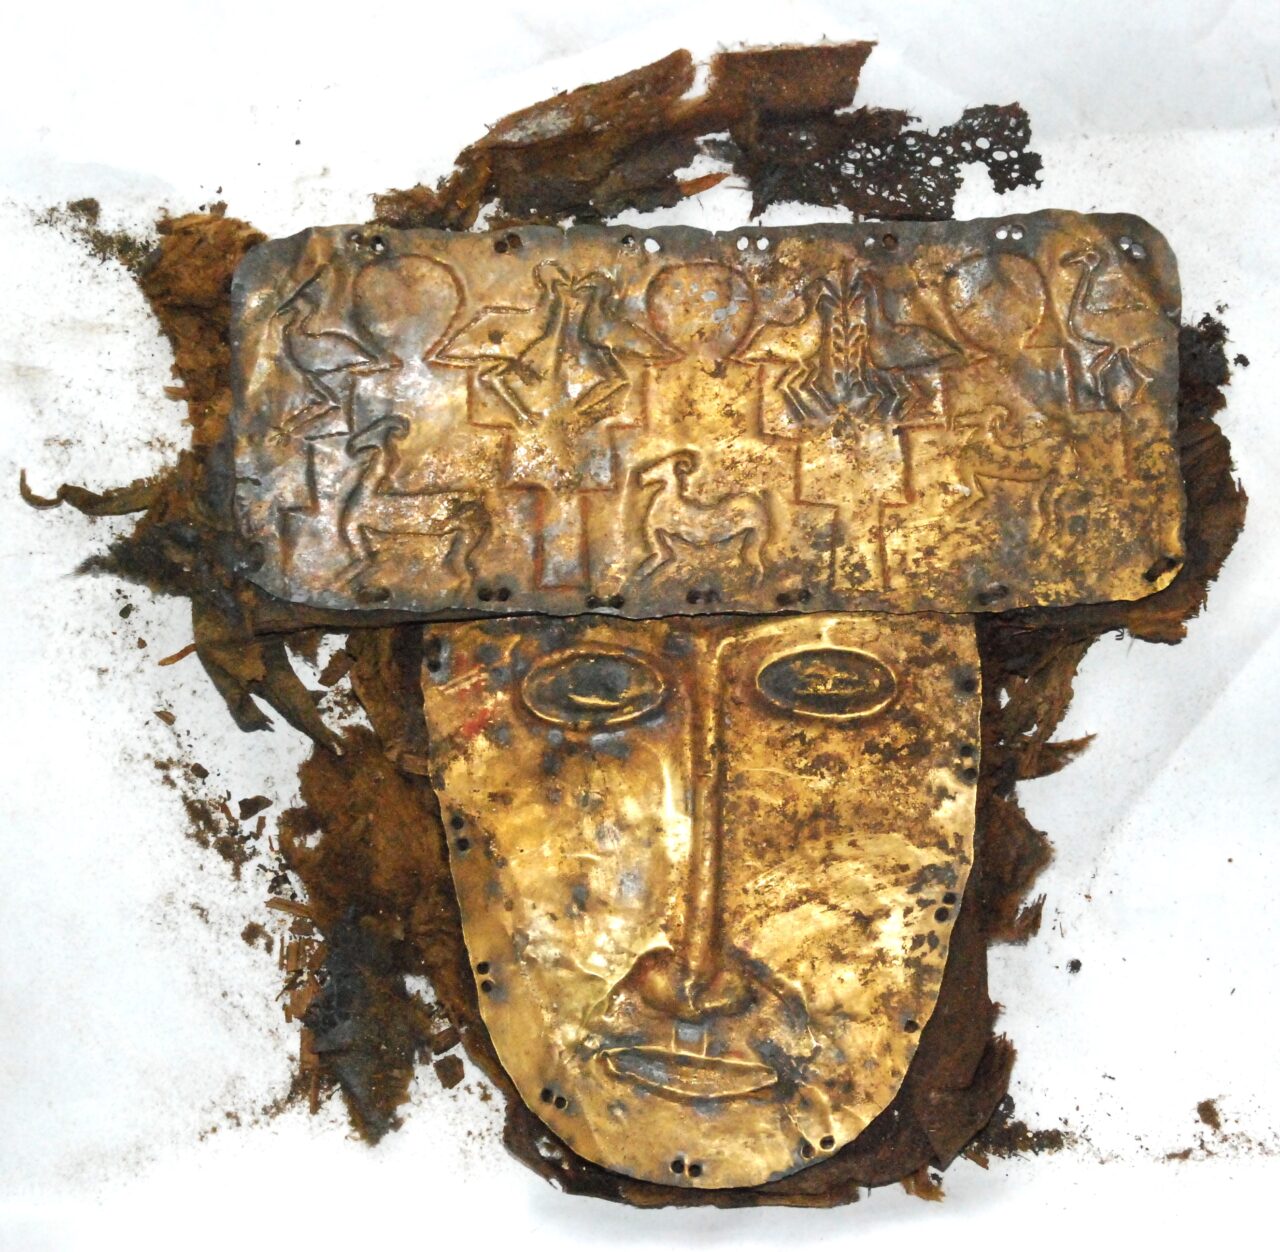 Golden burial mask with abstracted features wearing rectangular headdress depicting animal and architectural forms; it rests on decayed silk